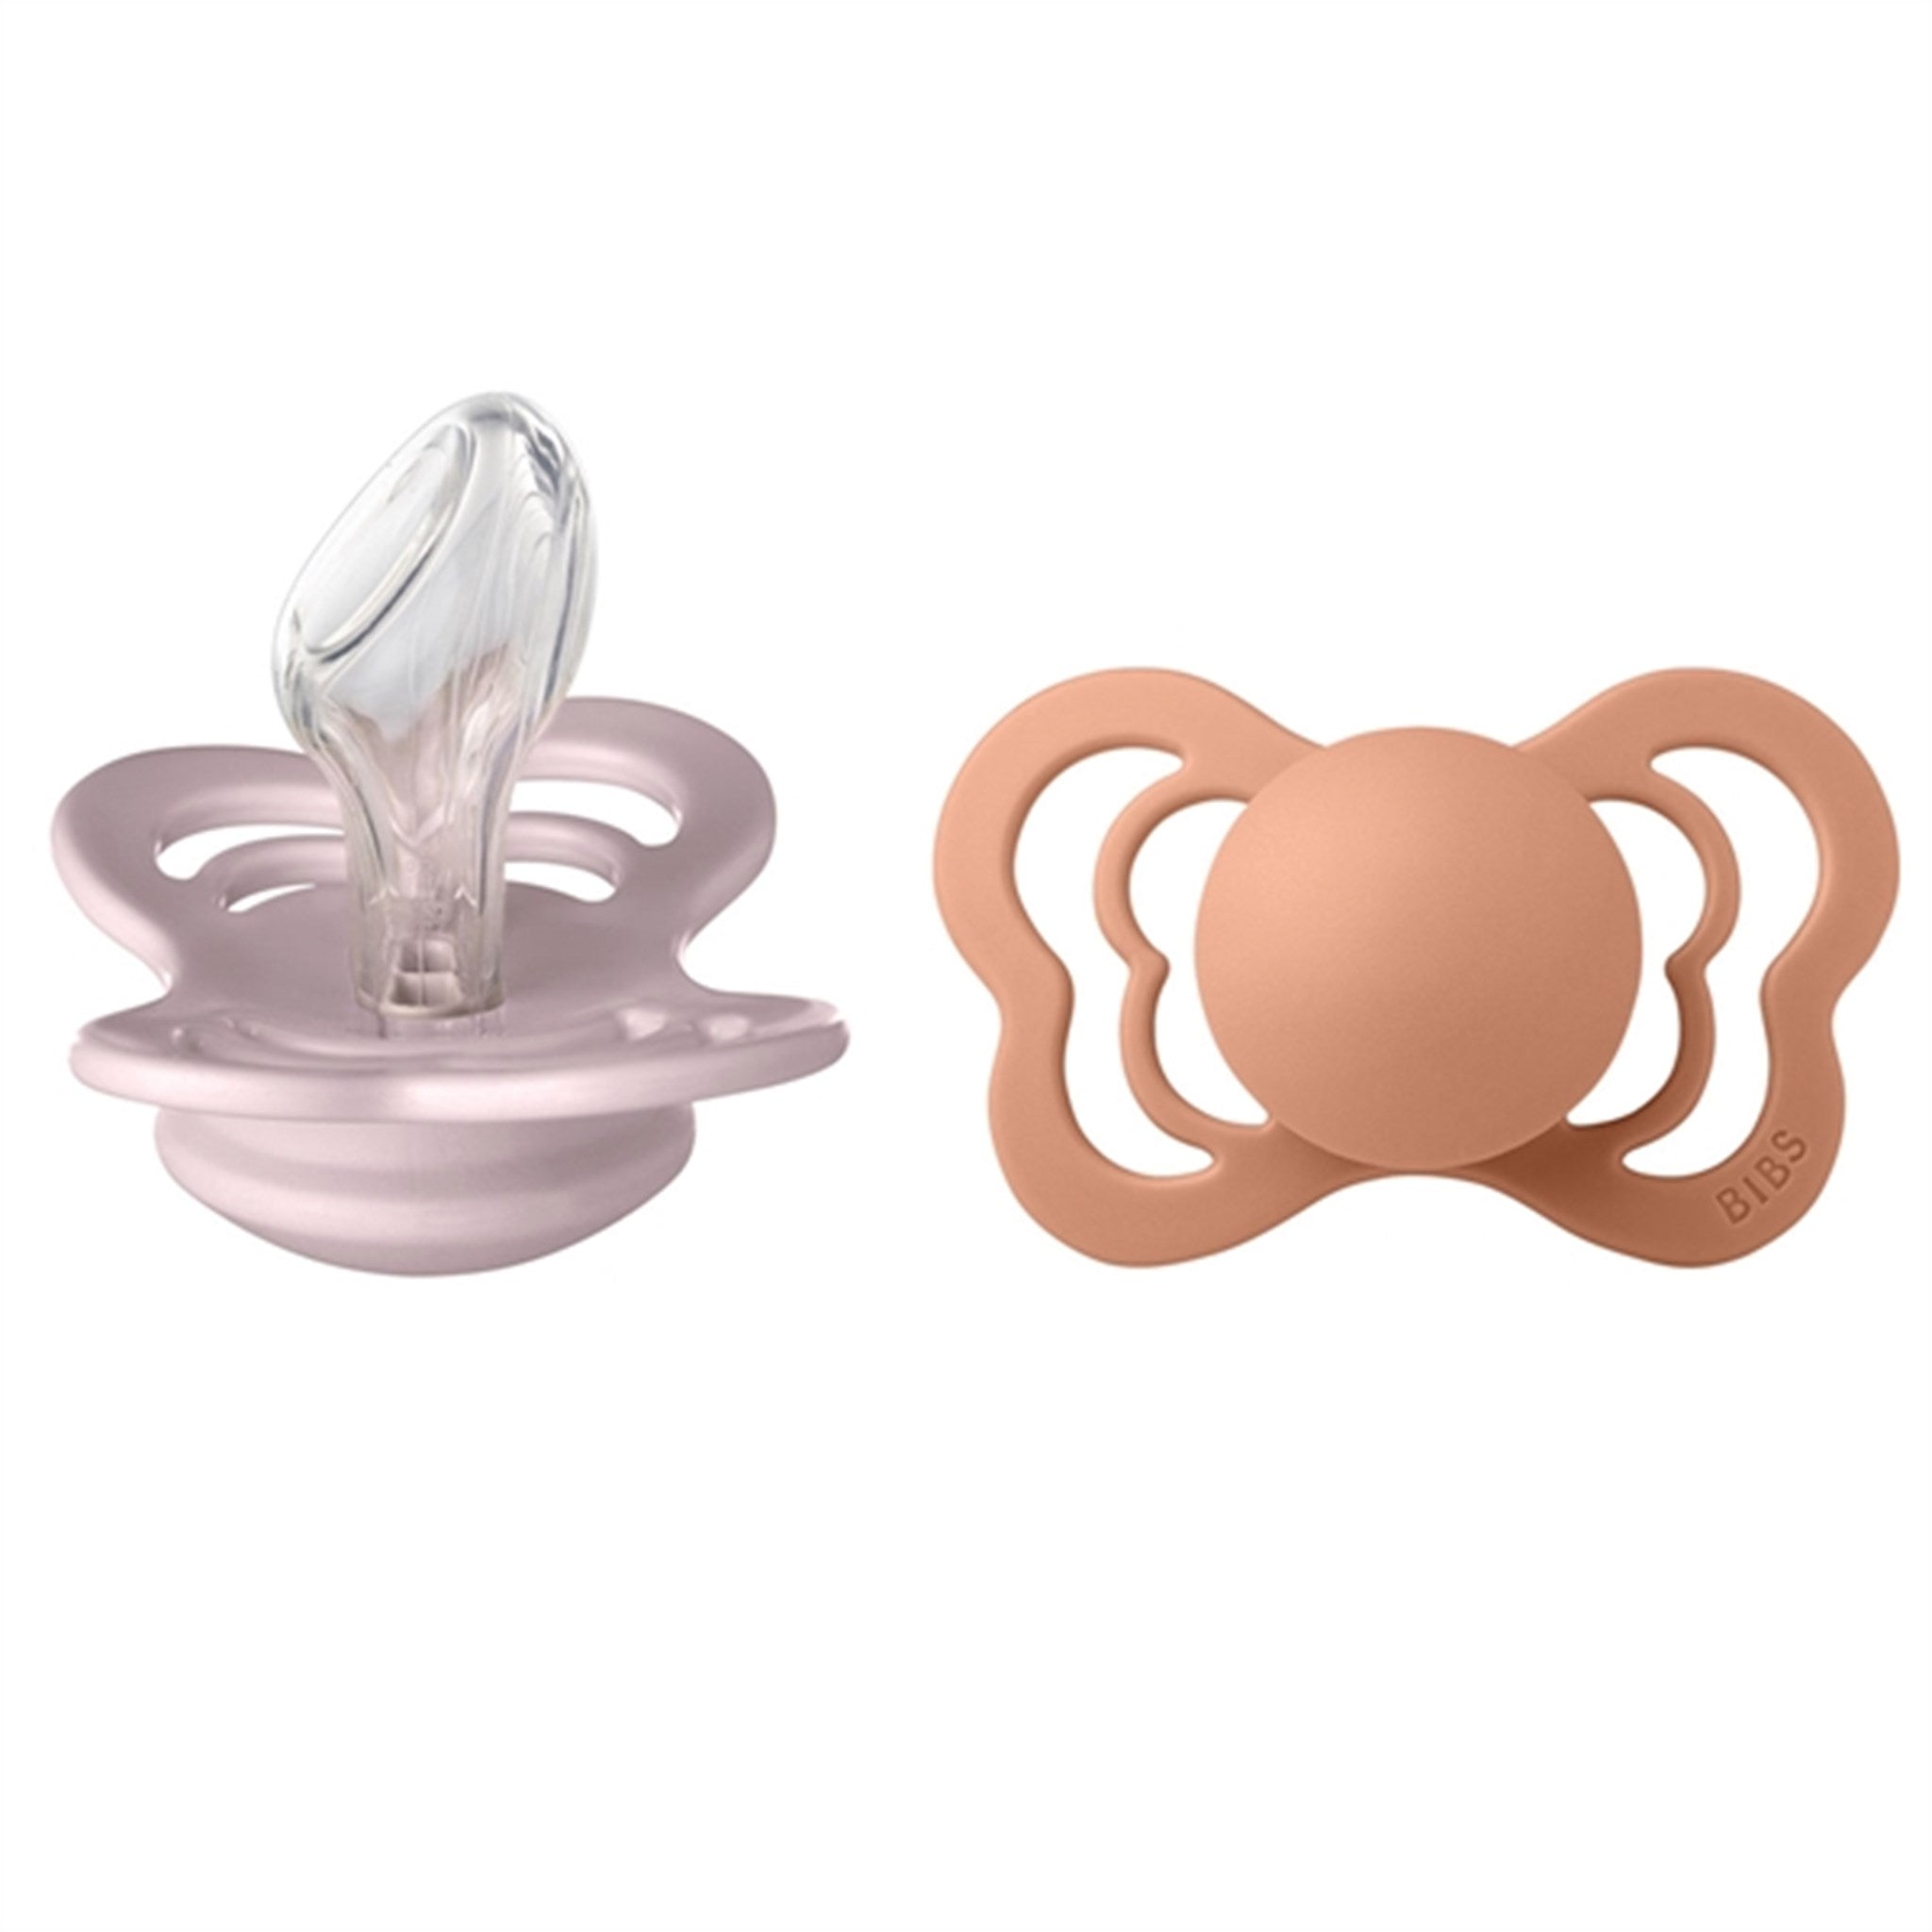 Bibs Couture Silicone Pacifiers 2-pack Anatomical Pink Plum/Peach